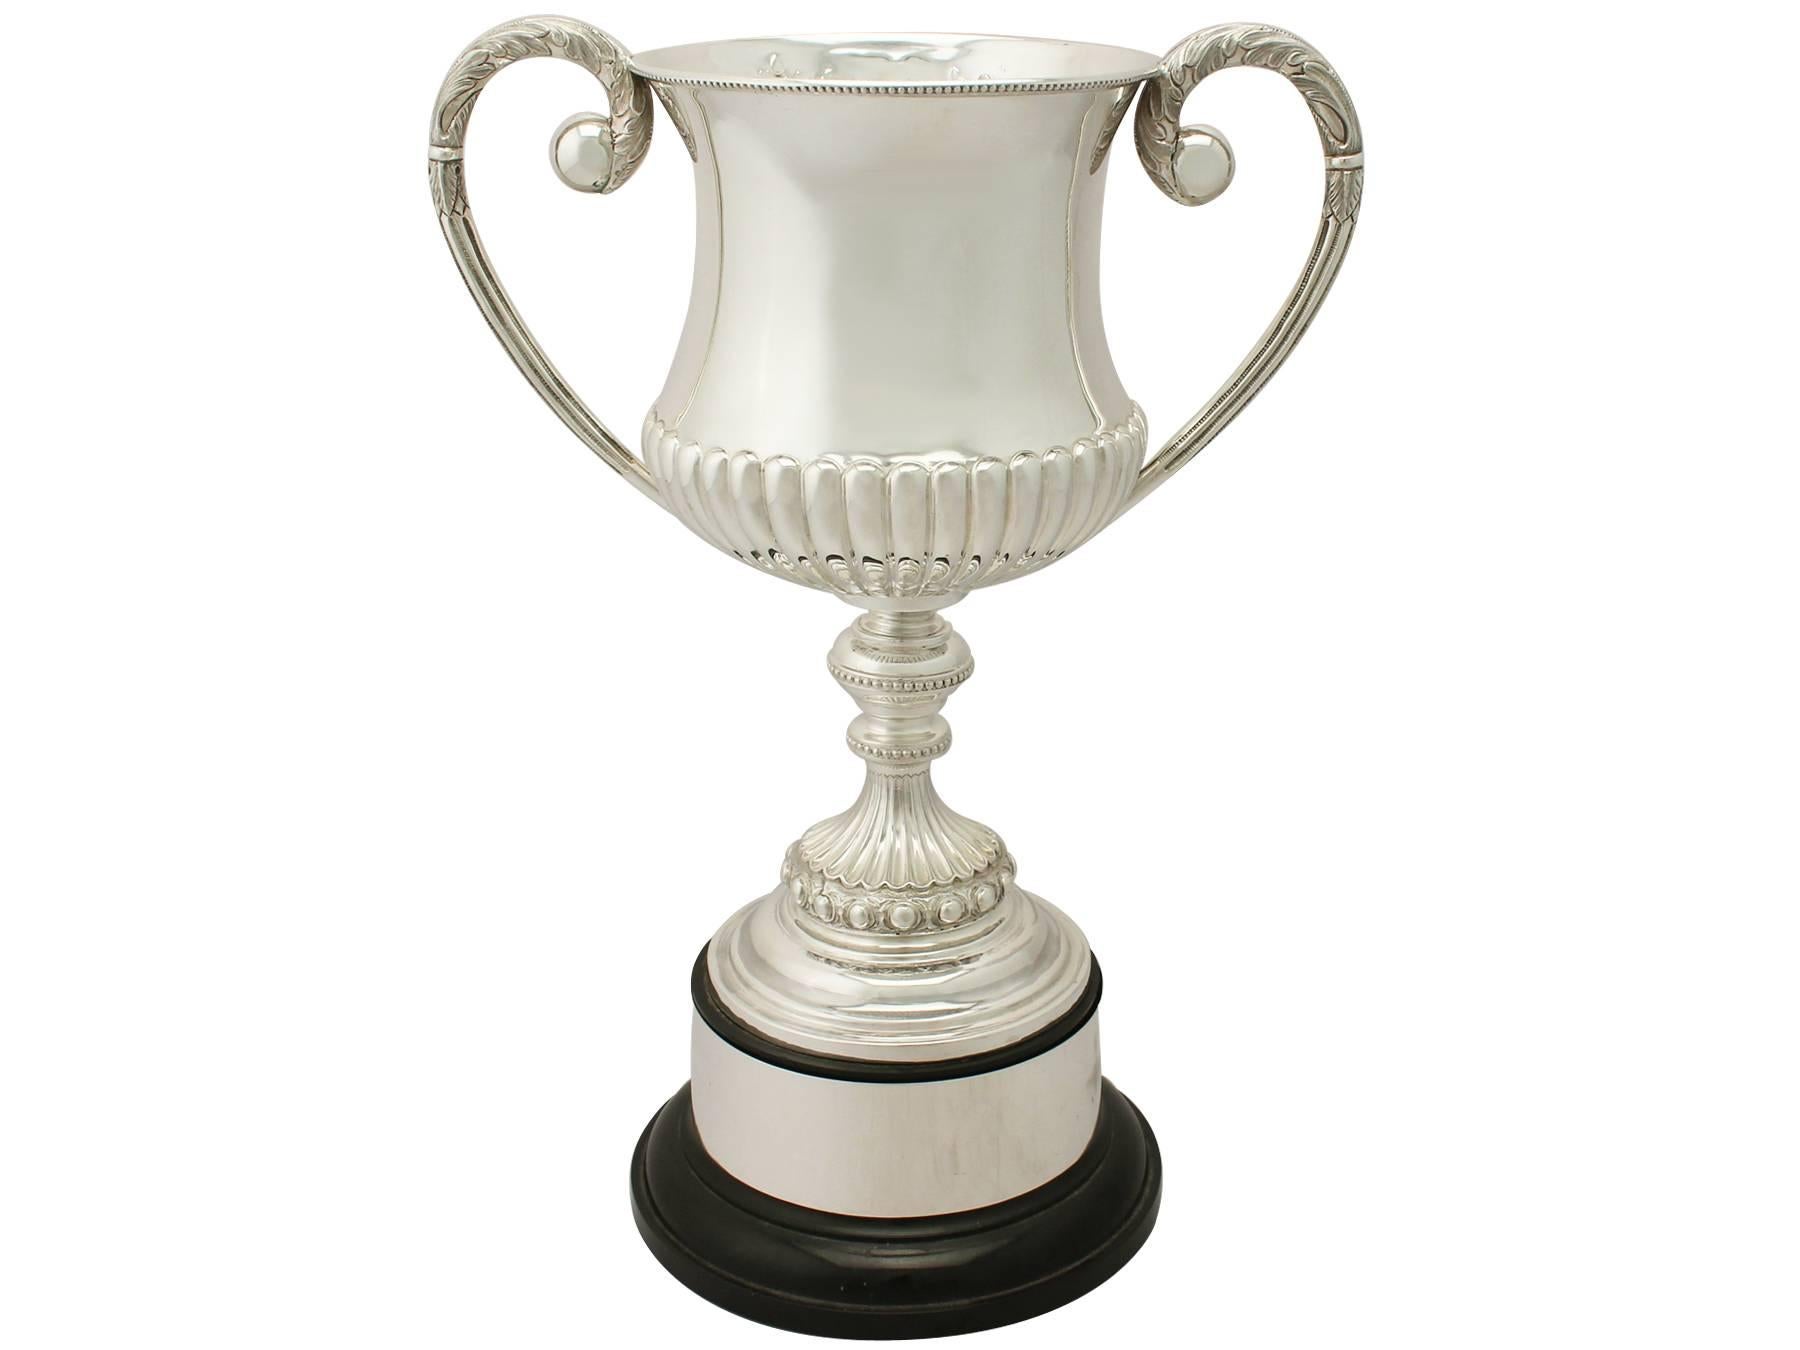 English Sterling Silver Presentation Cup, Antique Victorian